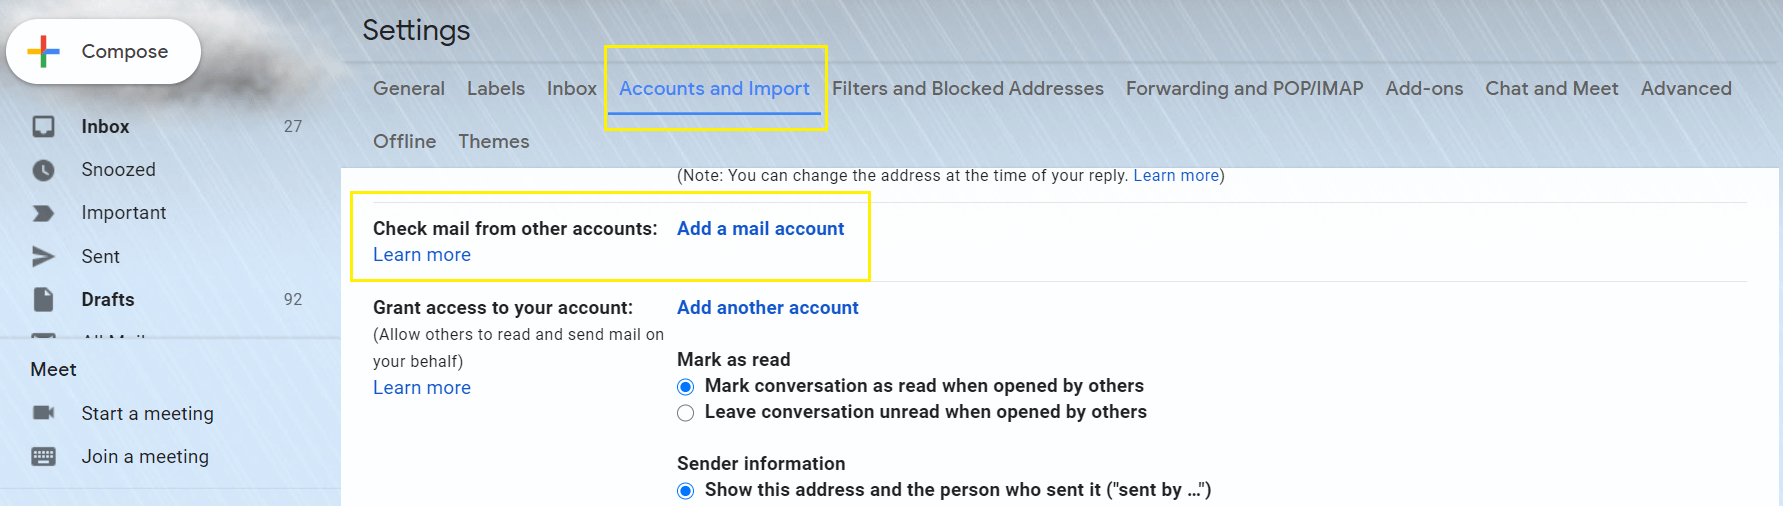 Connecting your Email With Personalized Domain to Gmail.